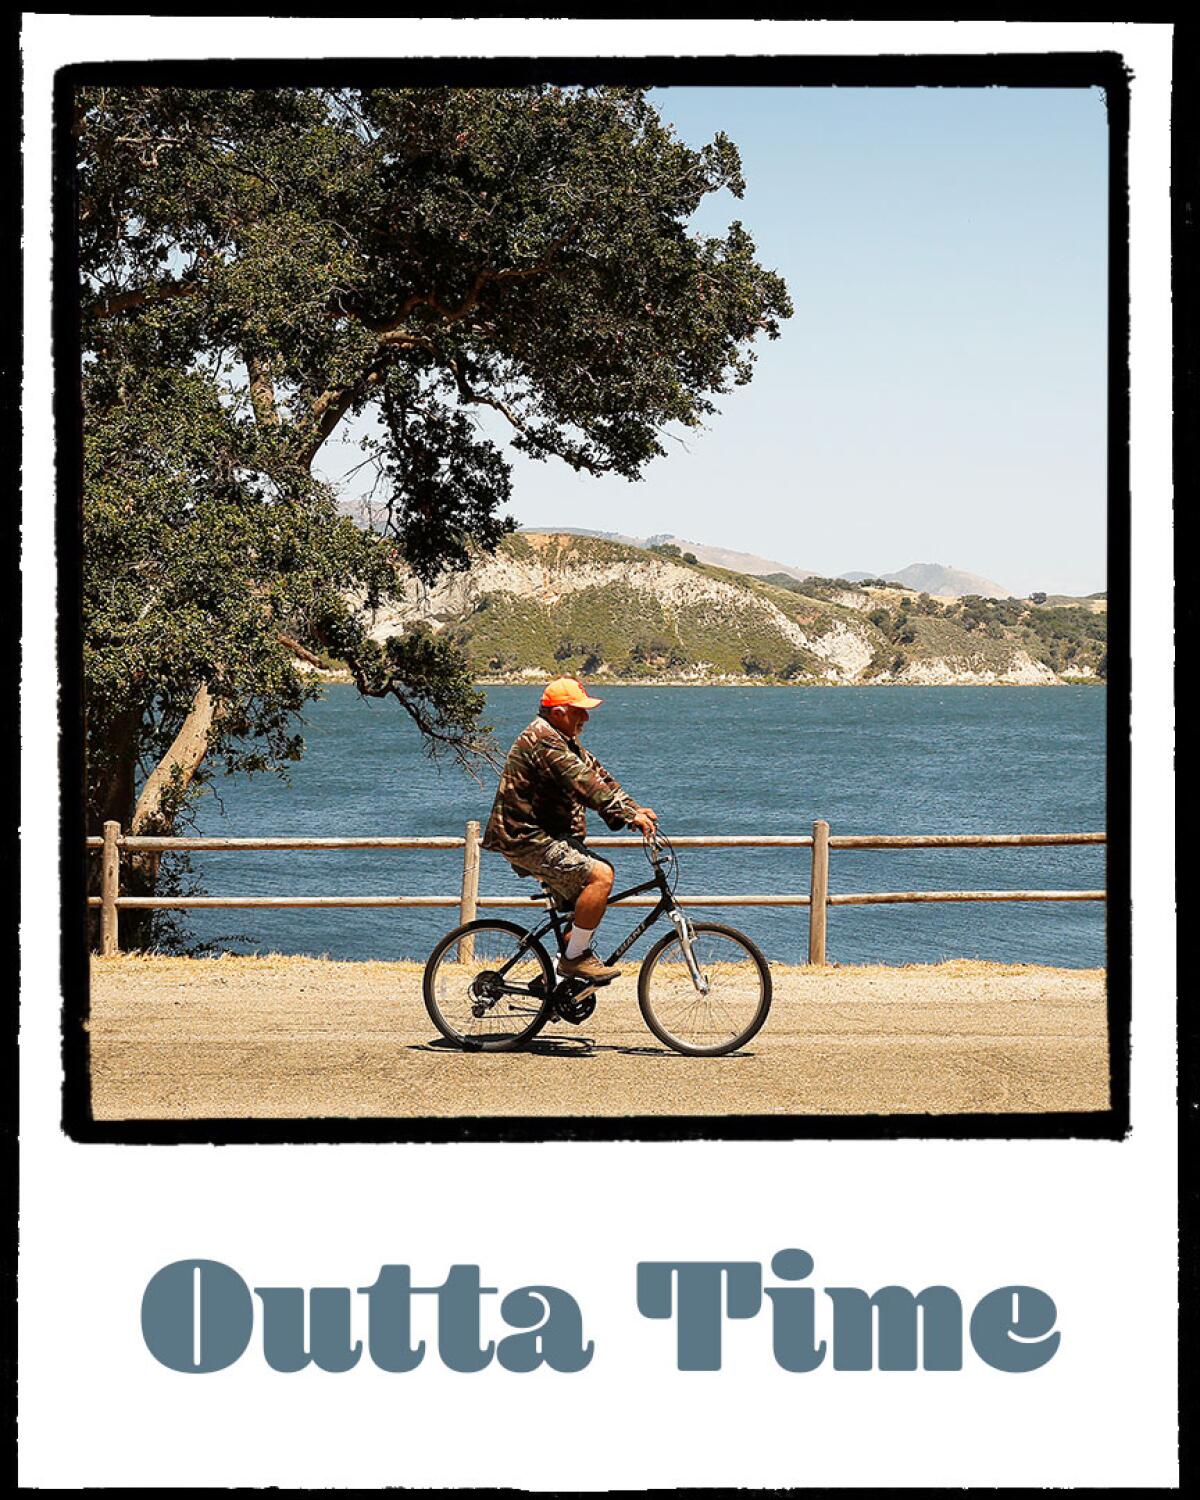 A photo made to look like a Polaroid shows a person biking past a body of water, with the words "Outta Time."